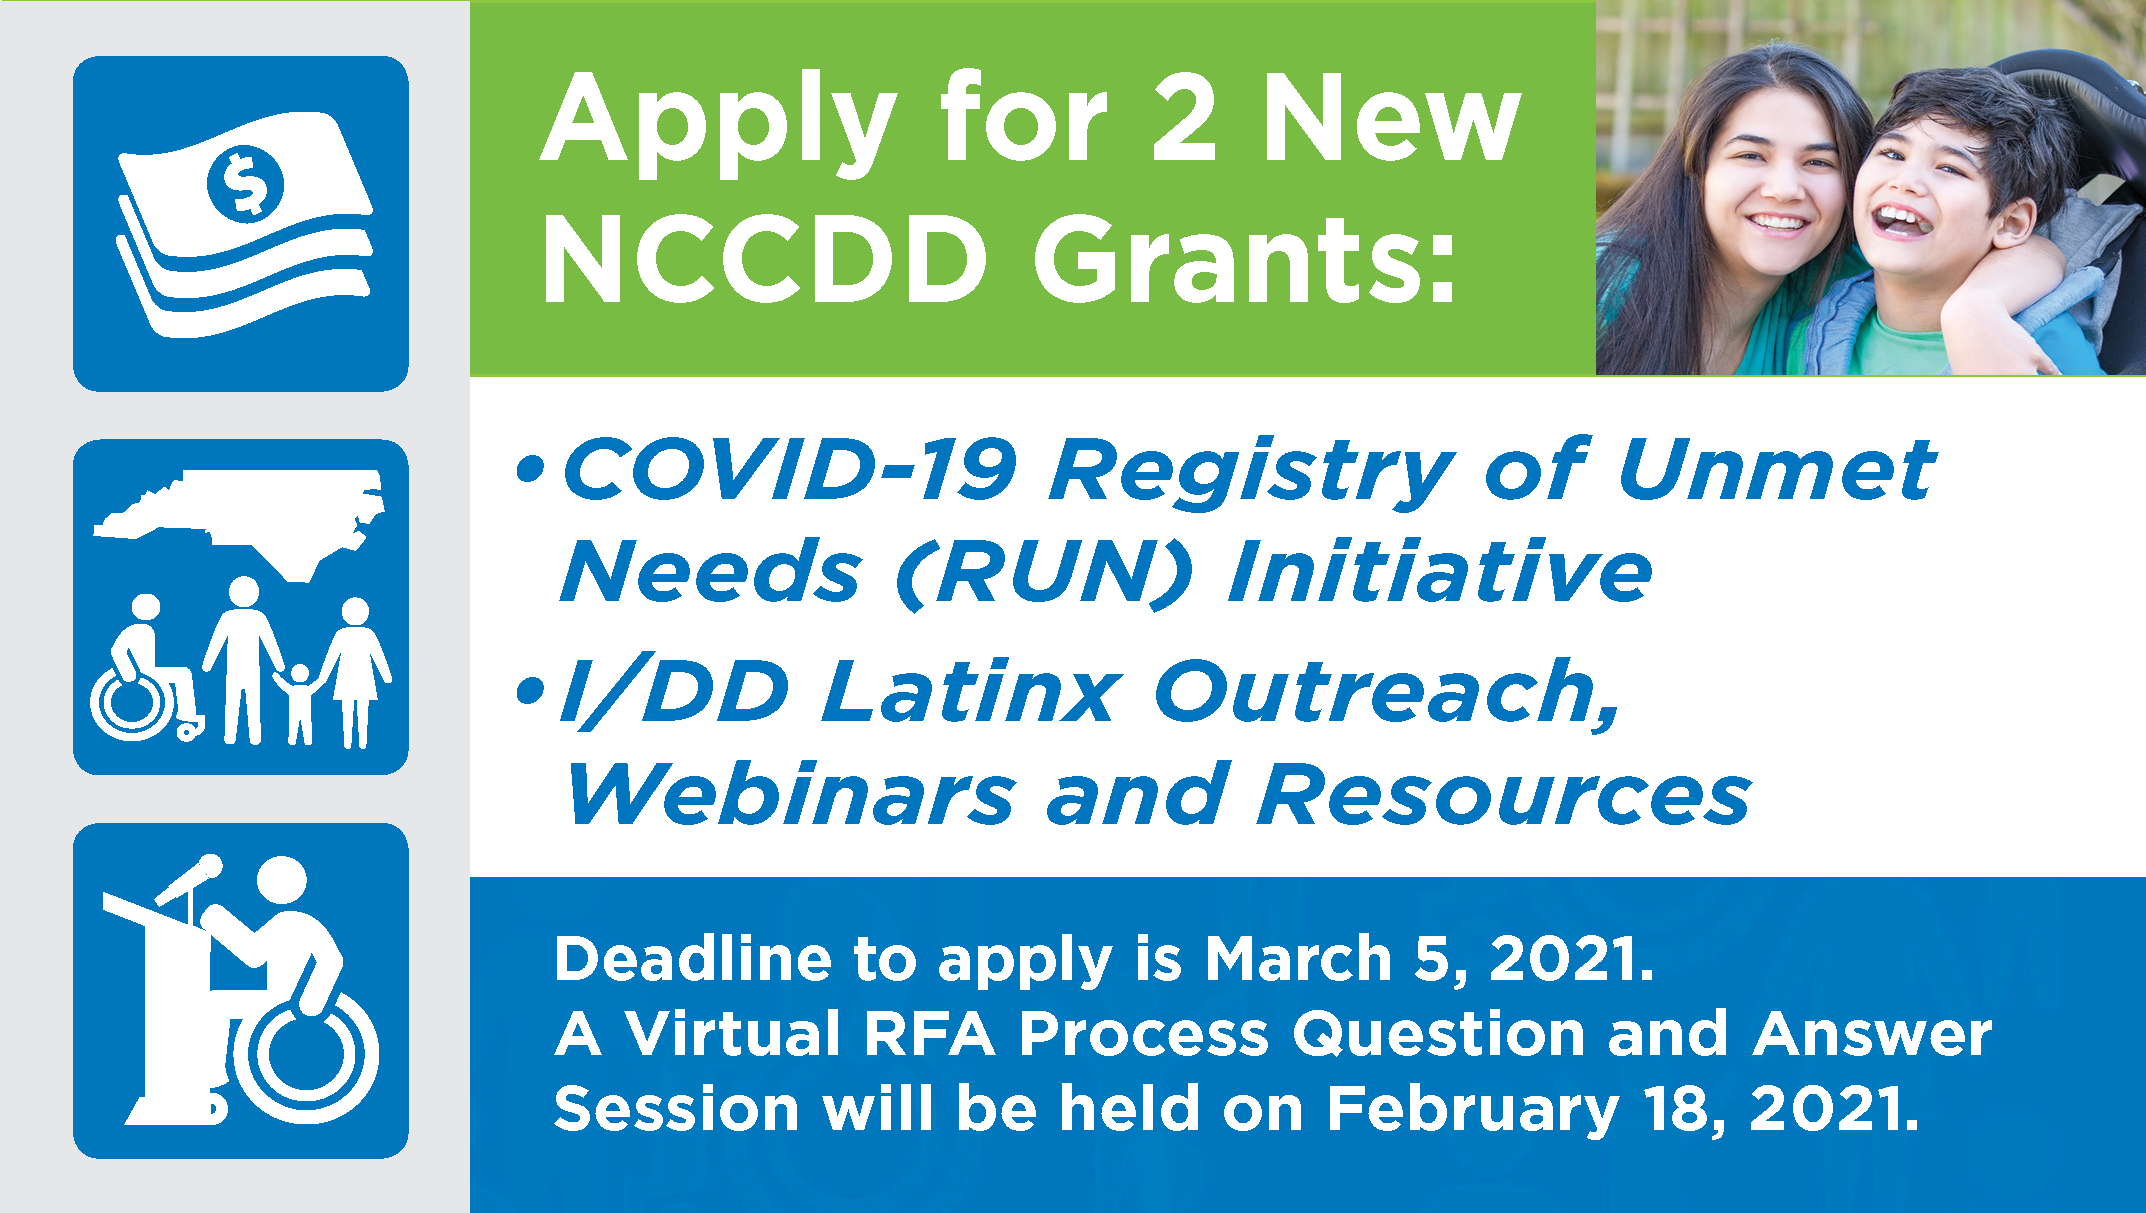 Apply for 2 new NCCDD grants: COVID-19 Registry of Unmet Needs (RUN) Initiative and I/DD Latinx Outreach, webinars and resources initiative